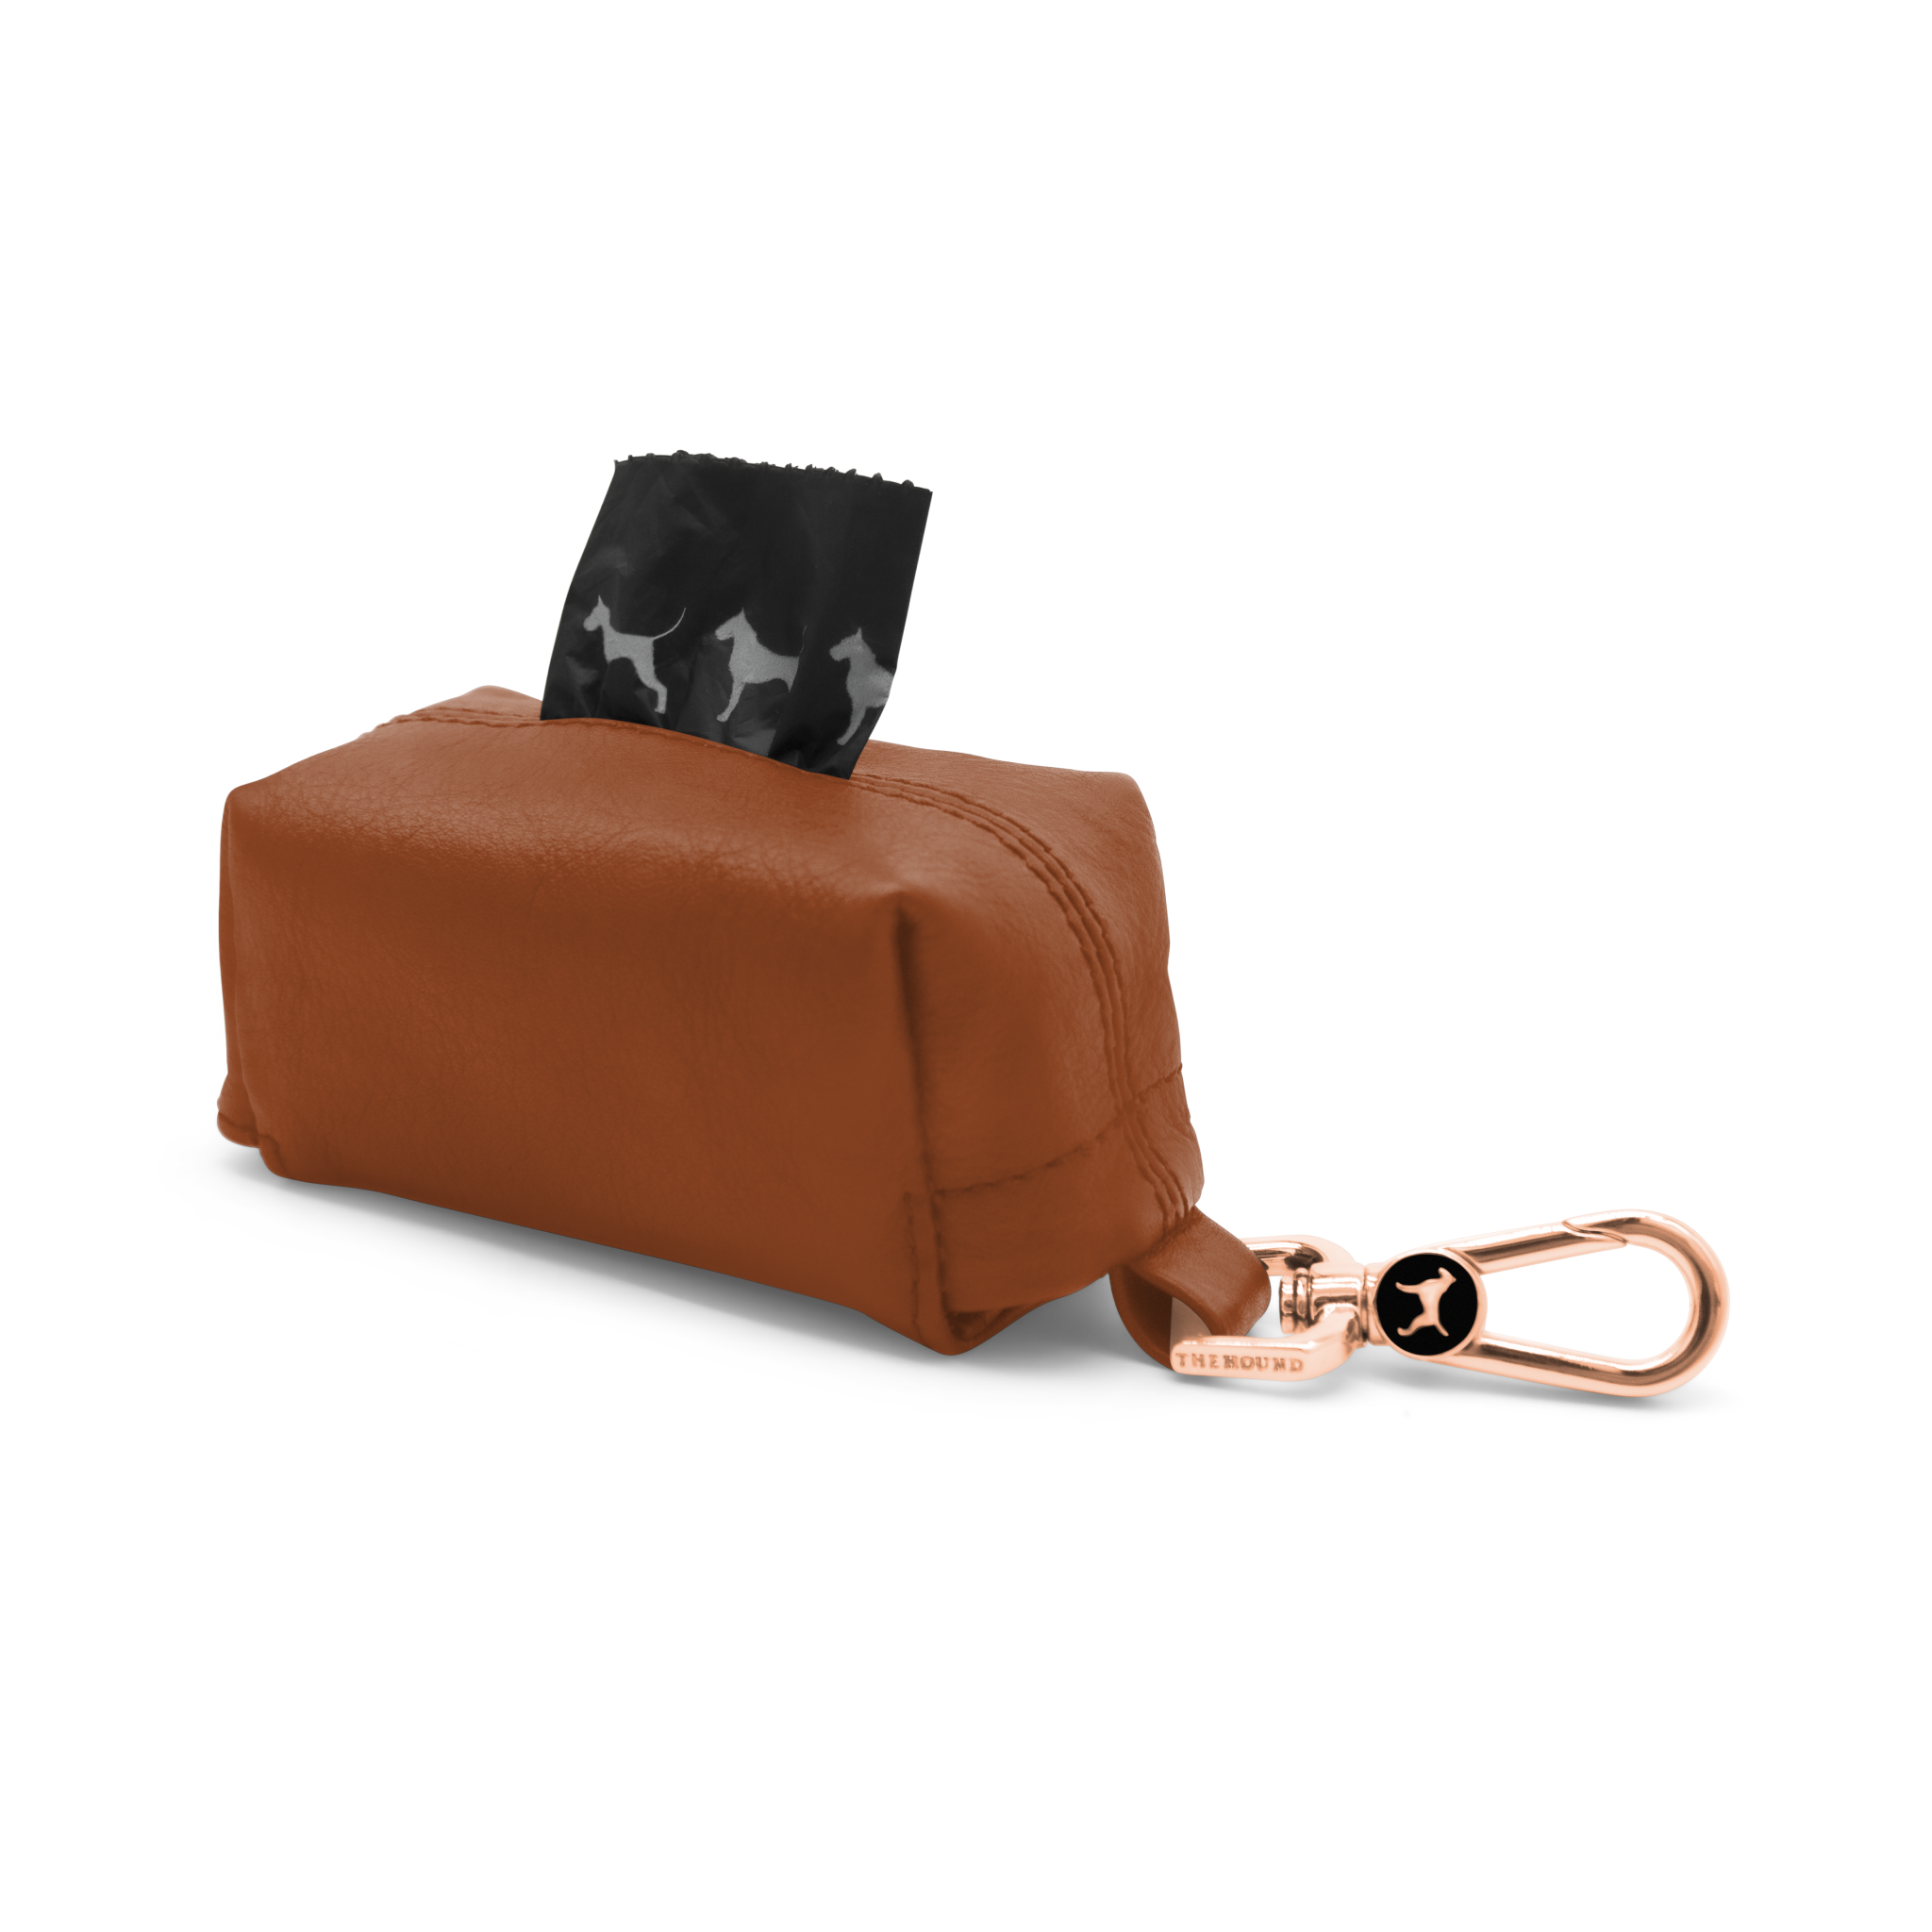 Leather Waste Bag Pouch